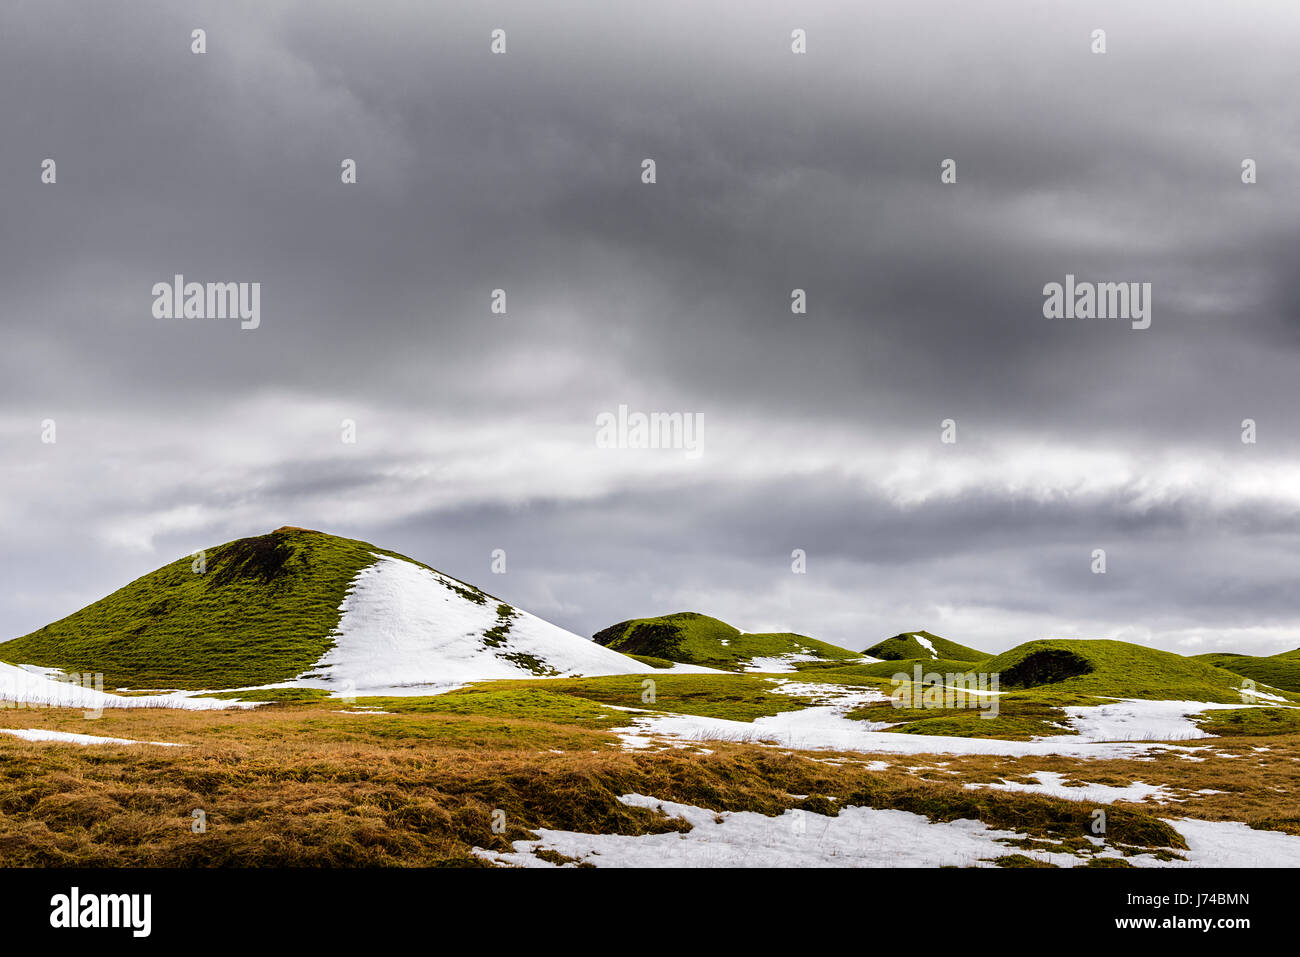 When the winter snow melts the green grass grows on the low hills of Iceland. Stock Photo